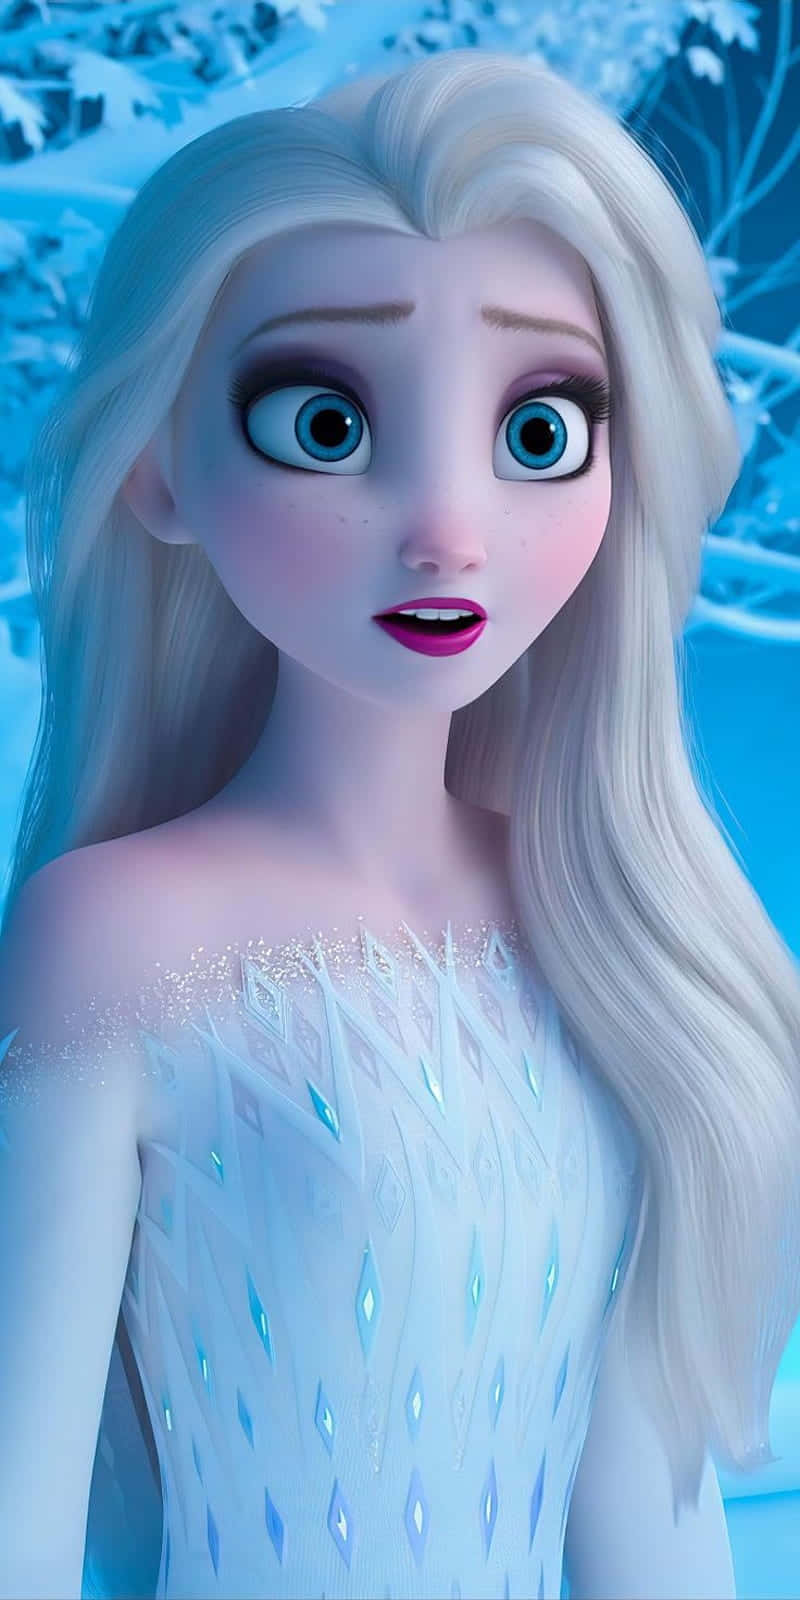 Intuitive, Stylish and Powerful – Elsa Phone Wallpaper